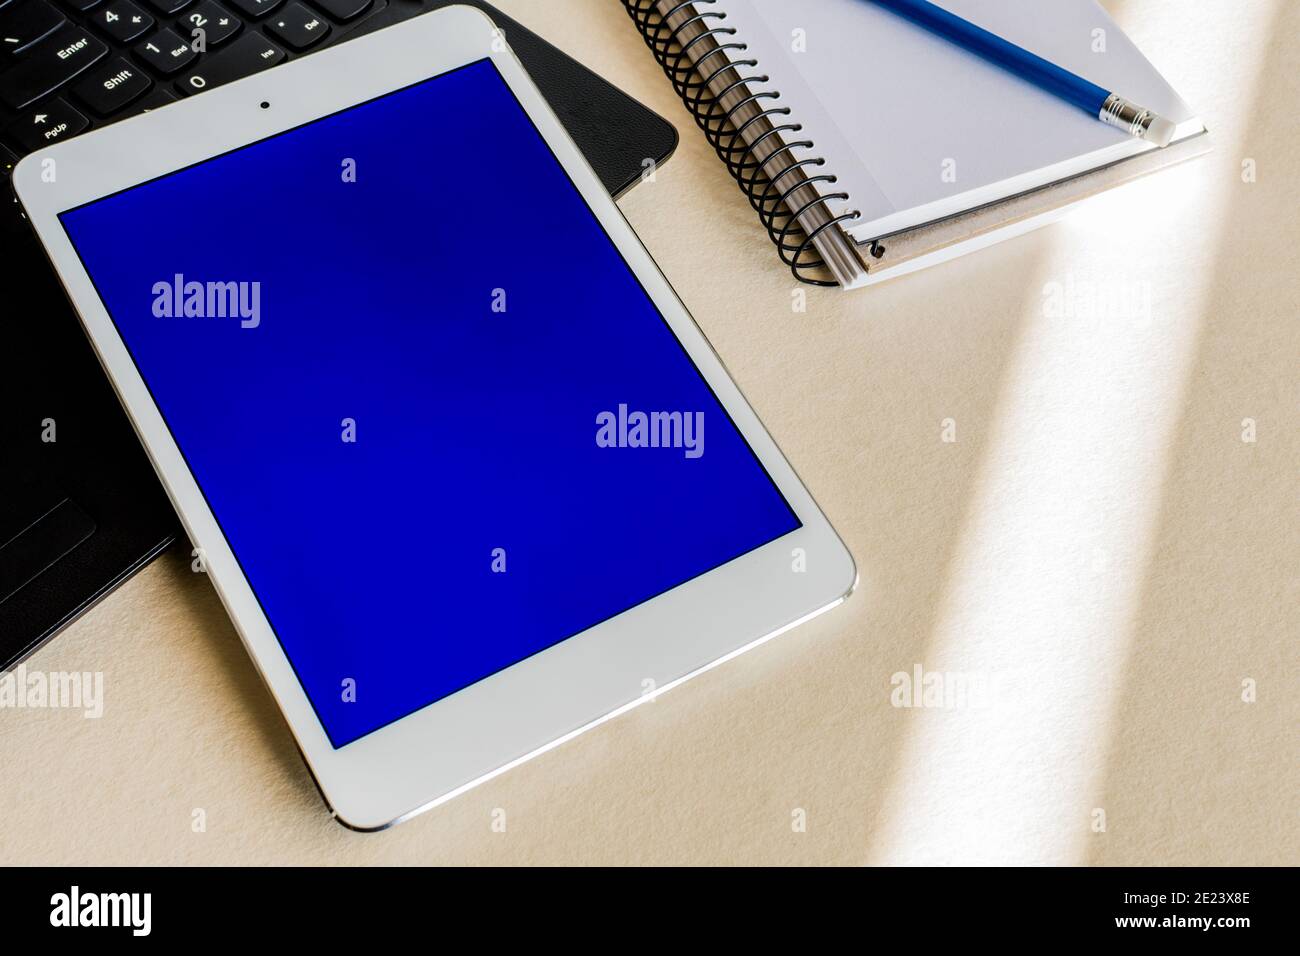 Tablet with blue screen on the keyboard of a laptop on a desk - technology and business concept Stock Photo